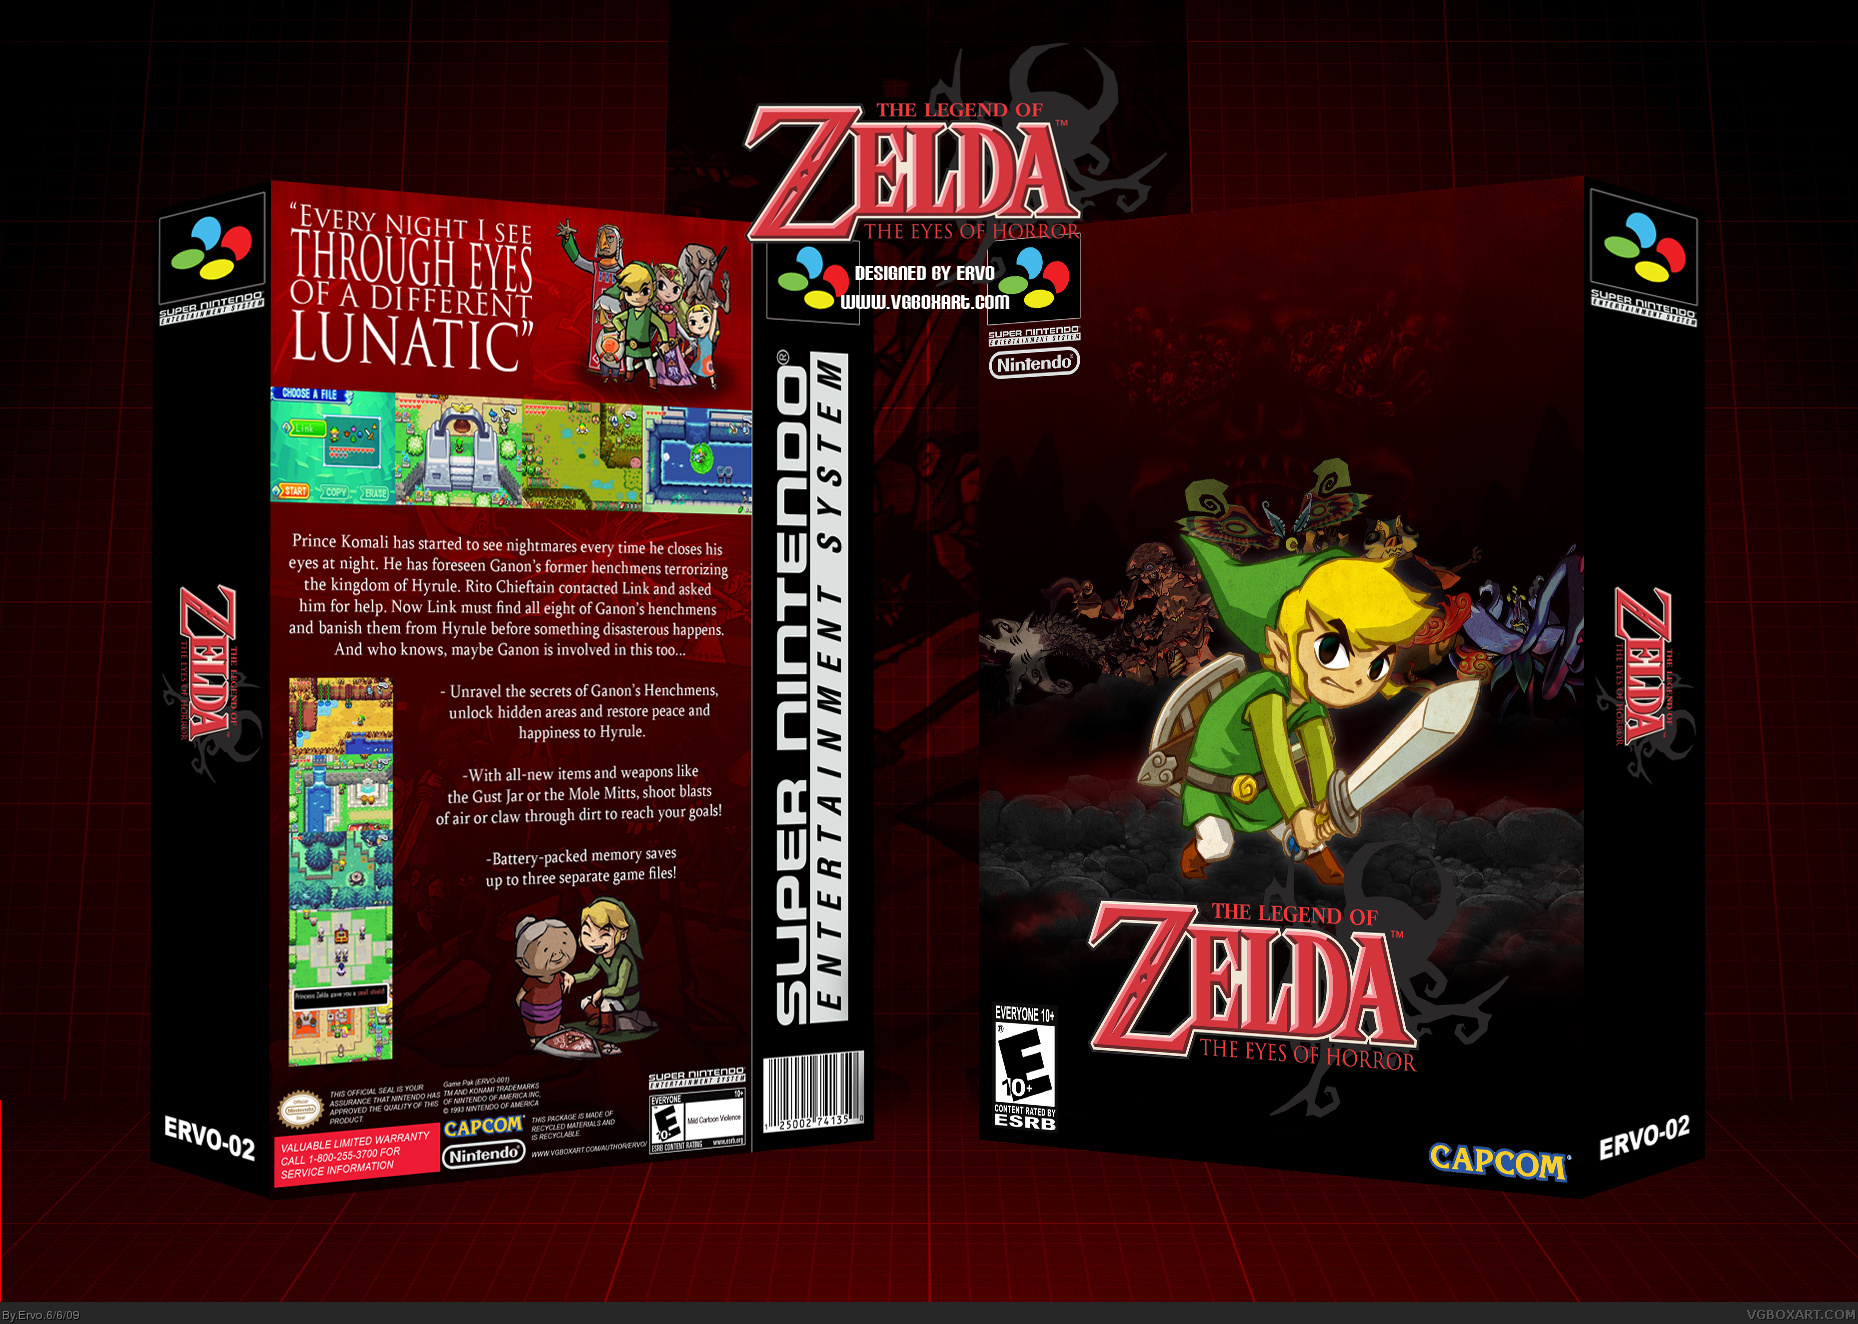 The Legend of Zelda: The Eyes of Horror box cover